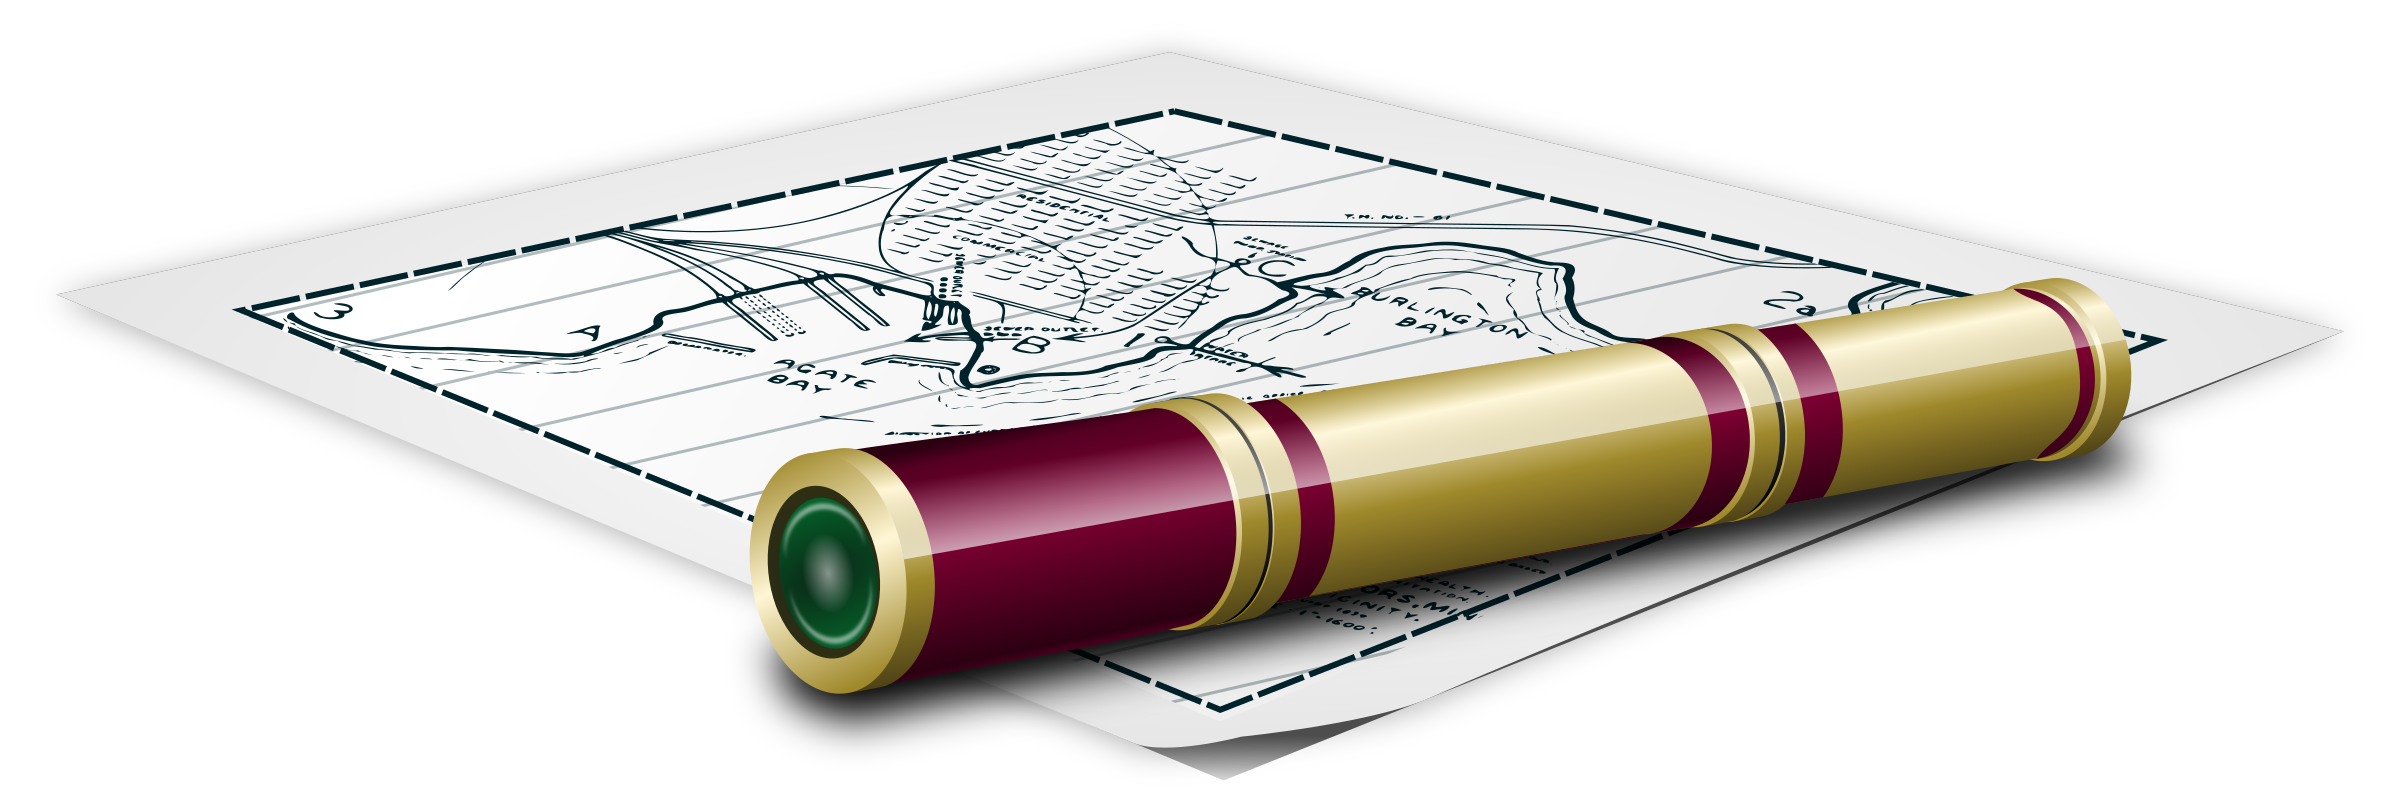 Exploration clipart #7, Download drawings